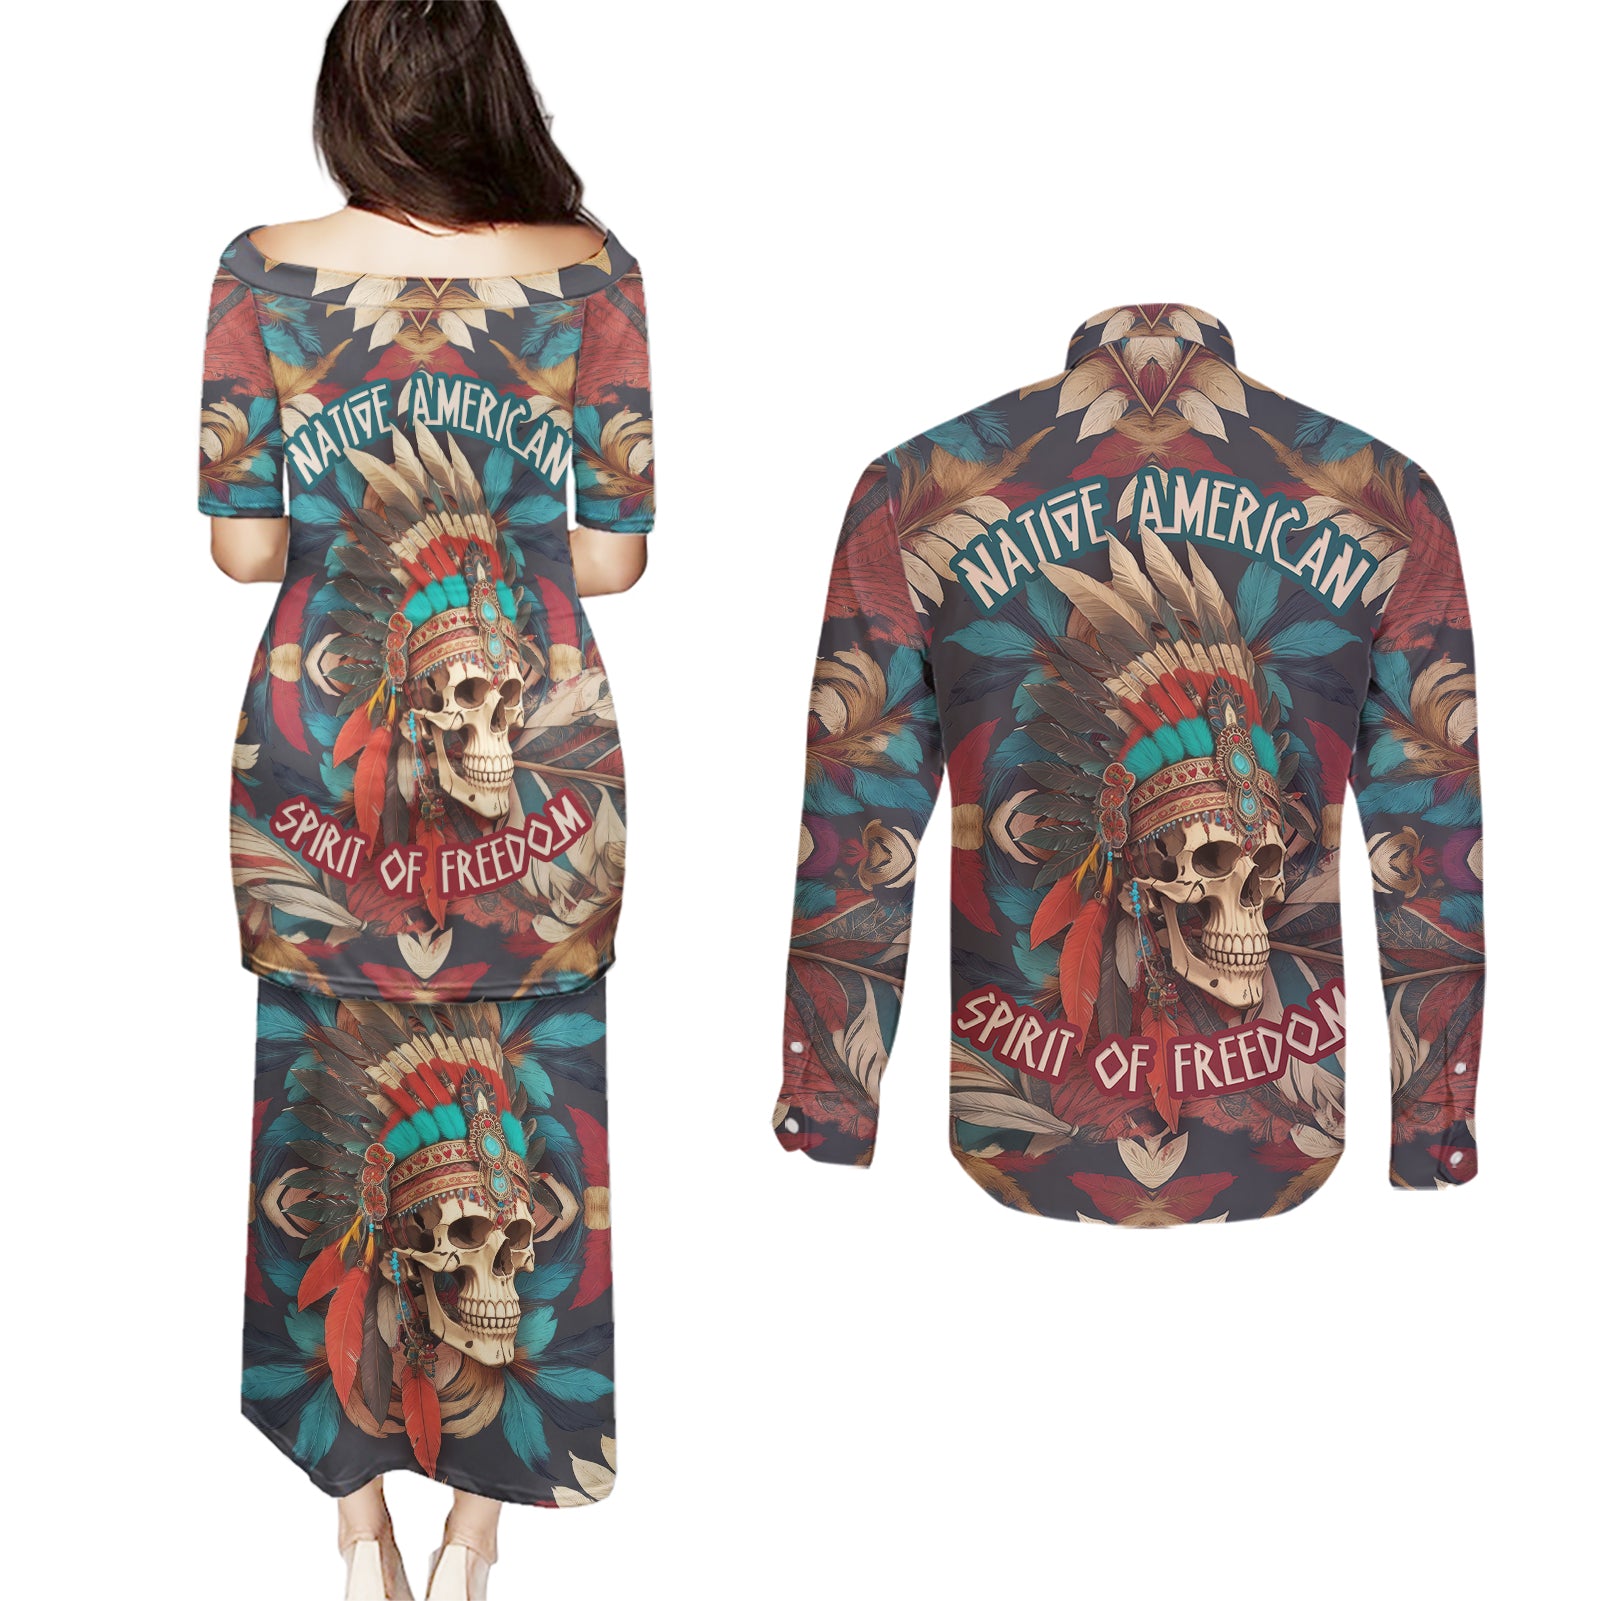 native-american-skull-couples-matching-puletasi-dress-and-long-sleeve-button-shirts-native-merican-spirit-of-freedom